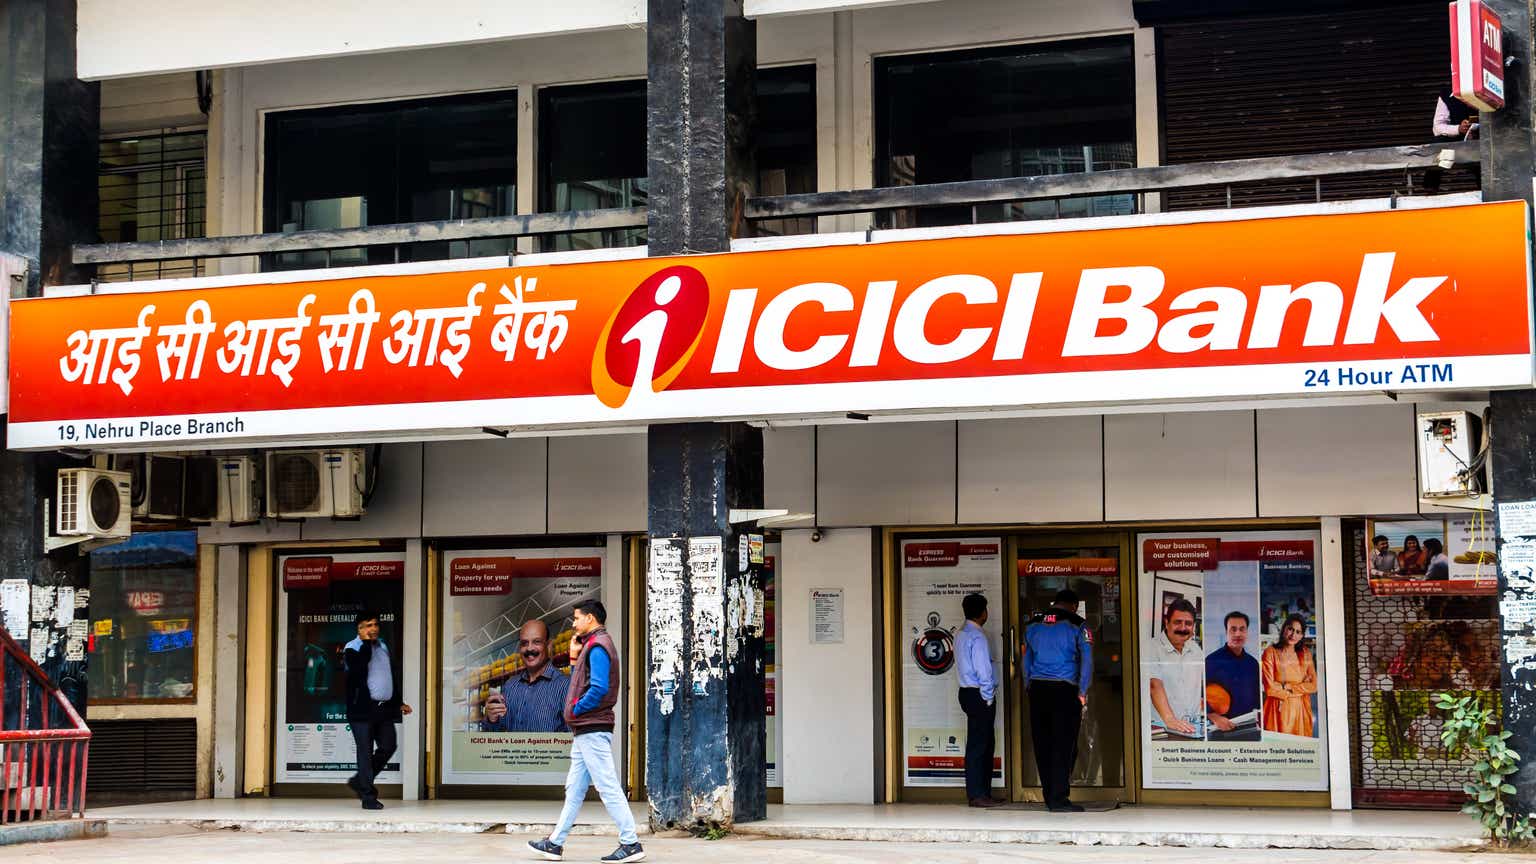 ICICI Bank: Digital Transformation Is A Double-Edged Sword